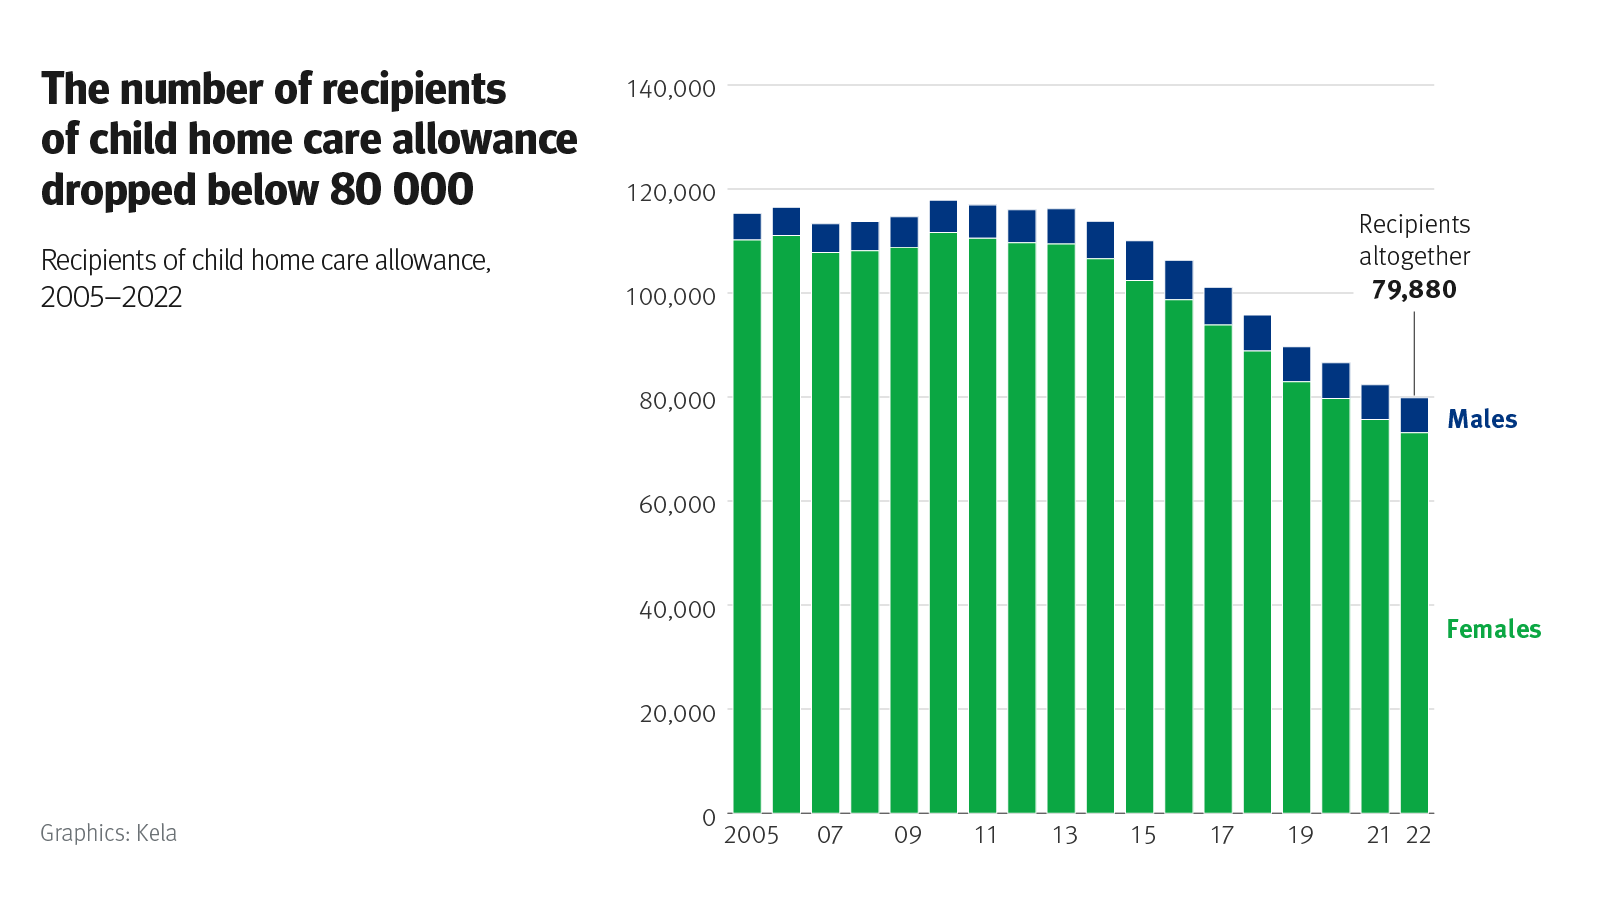 The number of recipients of child home care allowance dropped below 80 000